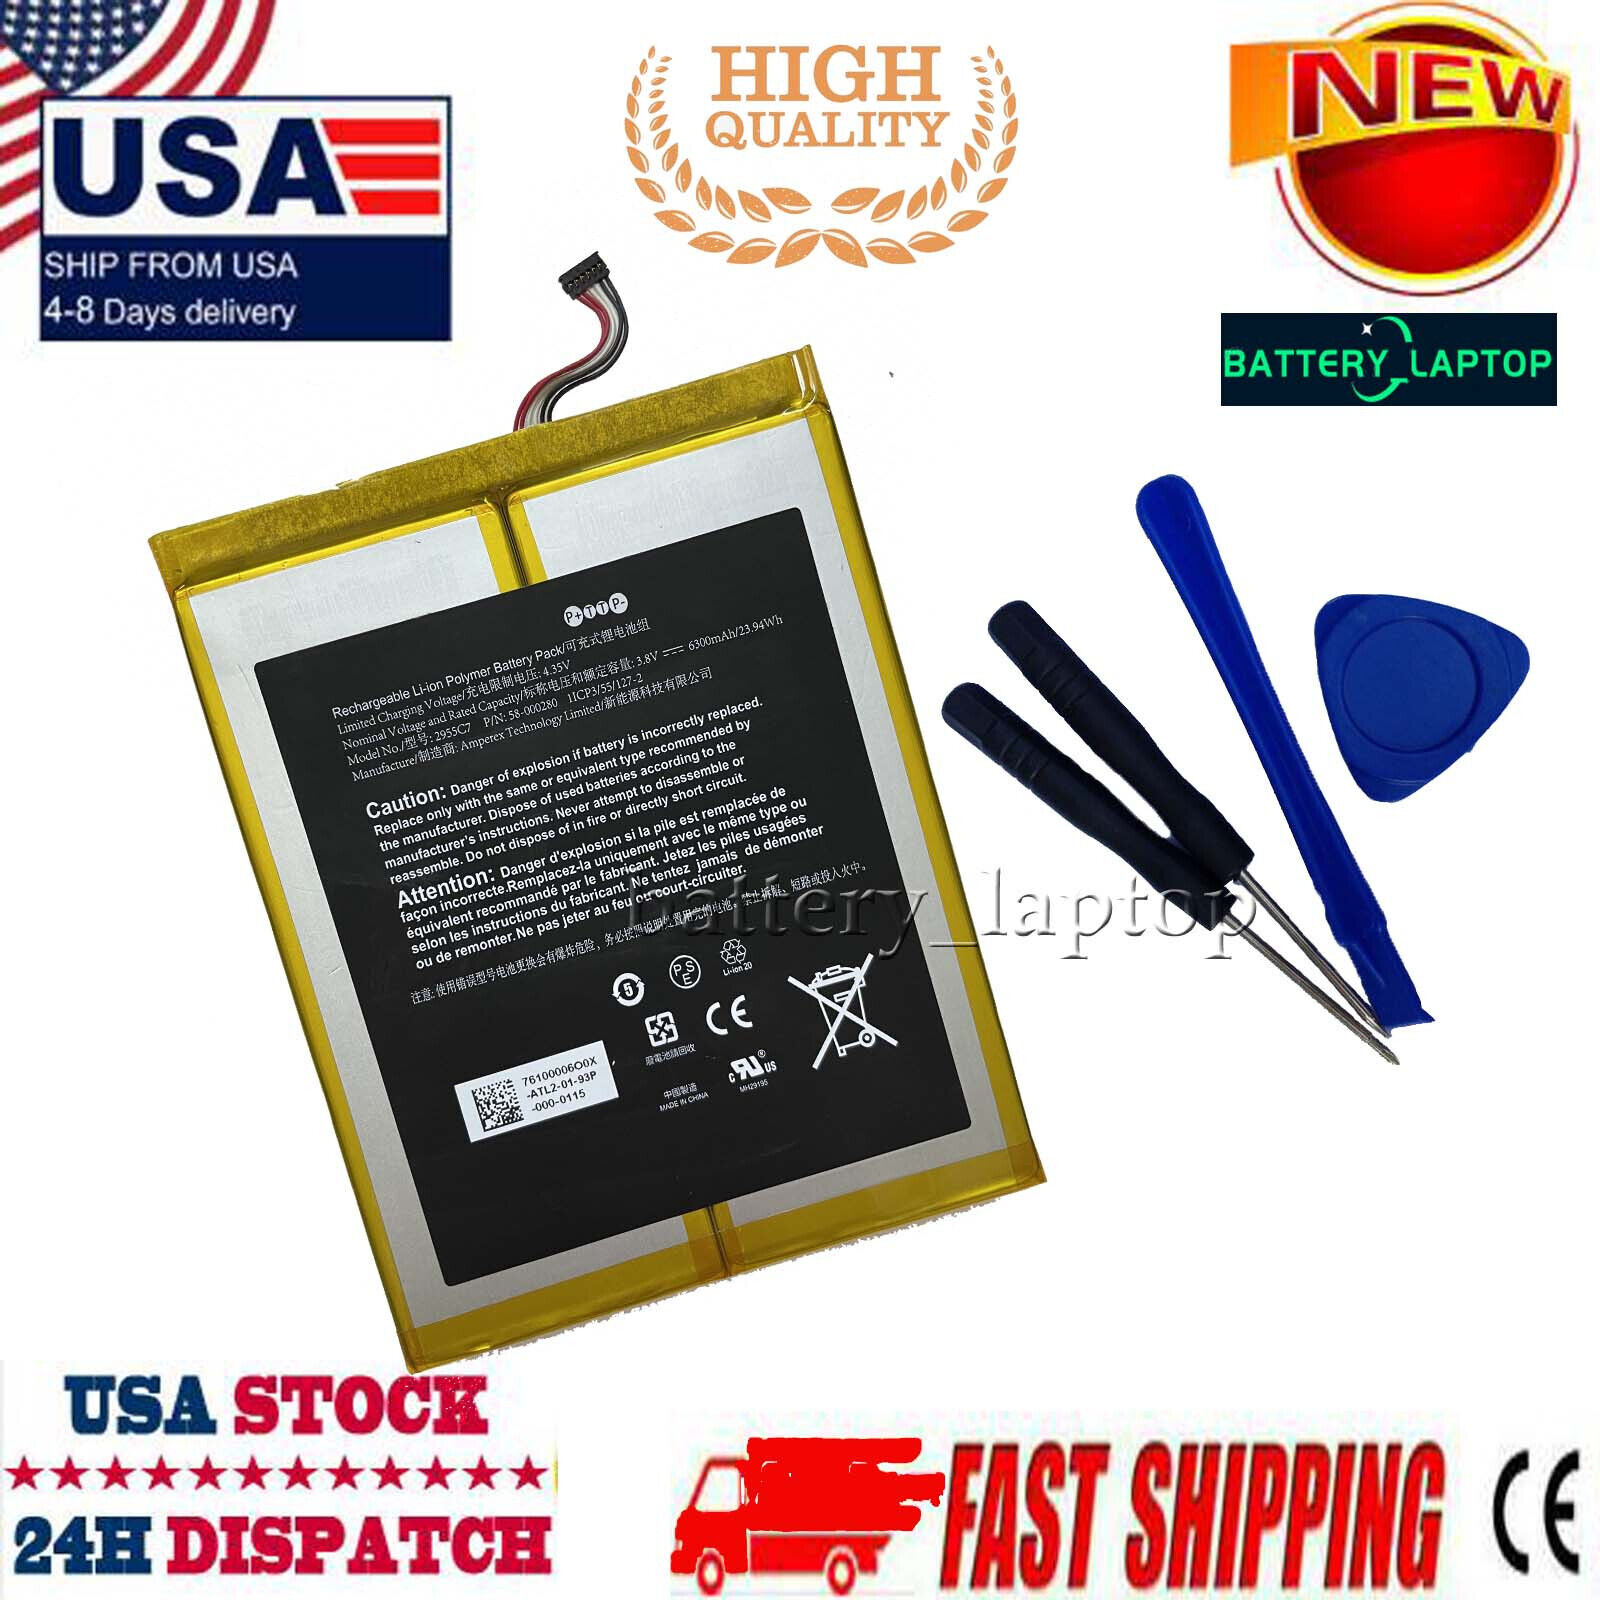 Replacement Battery For Amazon Kindle Tablet 58-000280 2955C7 A2110 3.8V 6300mAh